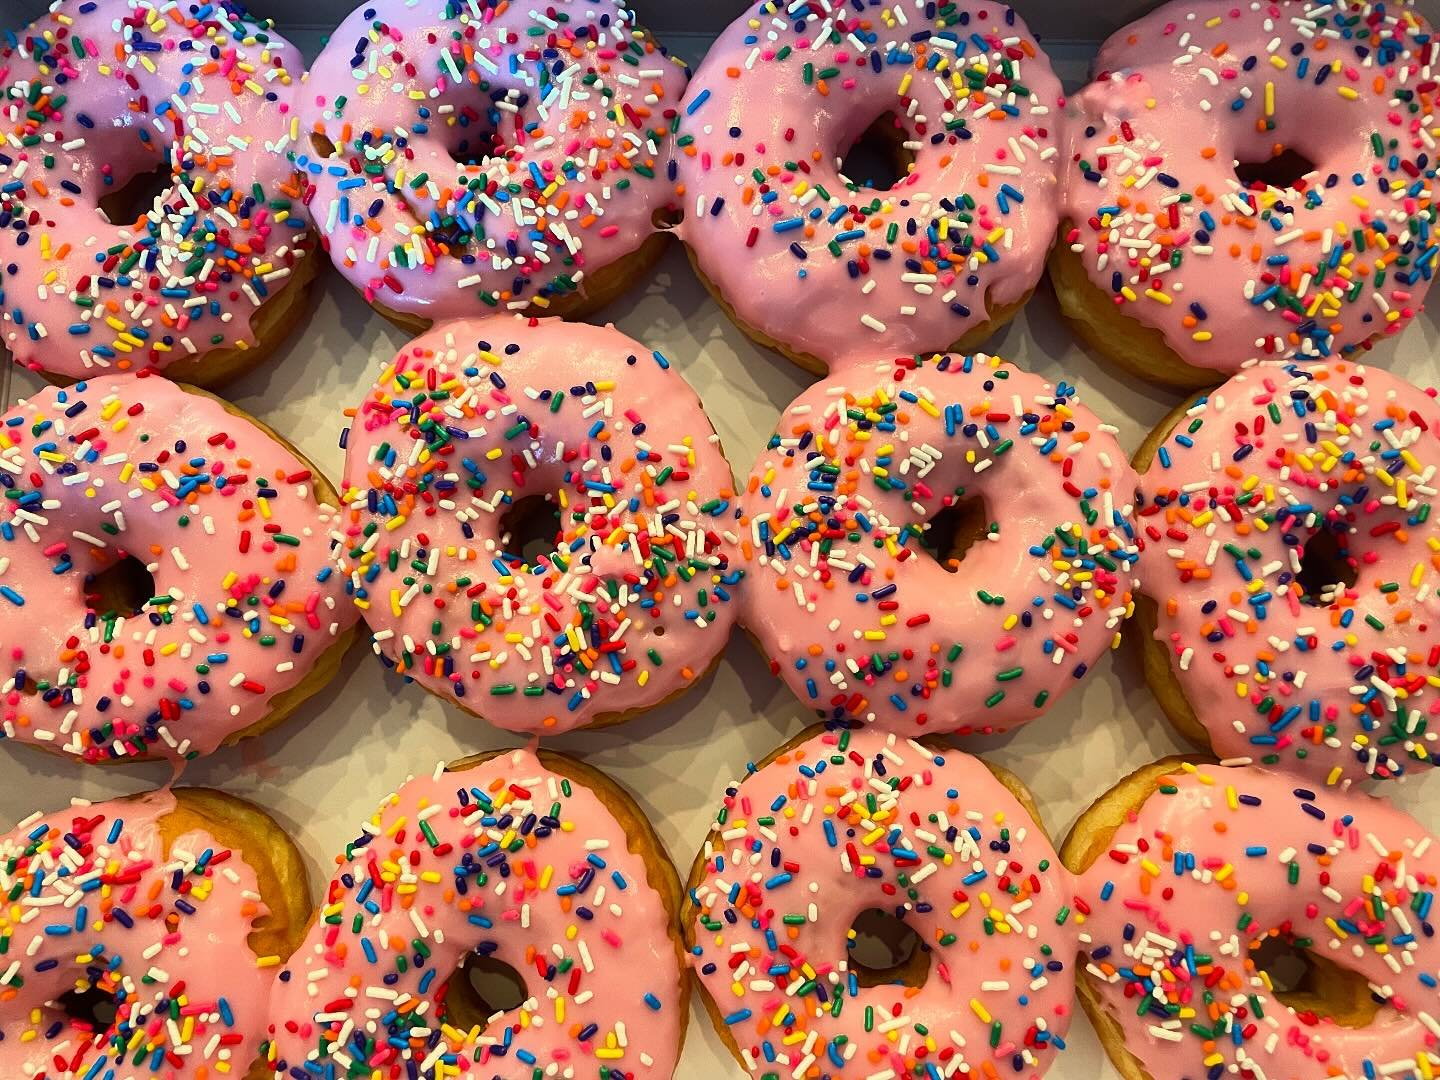 We have 24 Homer donuts for the first 24 people to come in for Simpsons Trivia tonight @7pm!